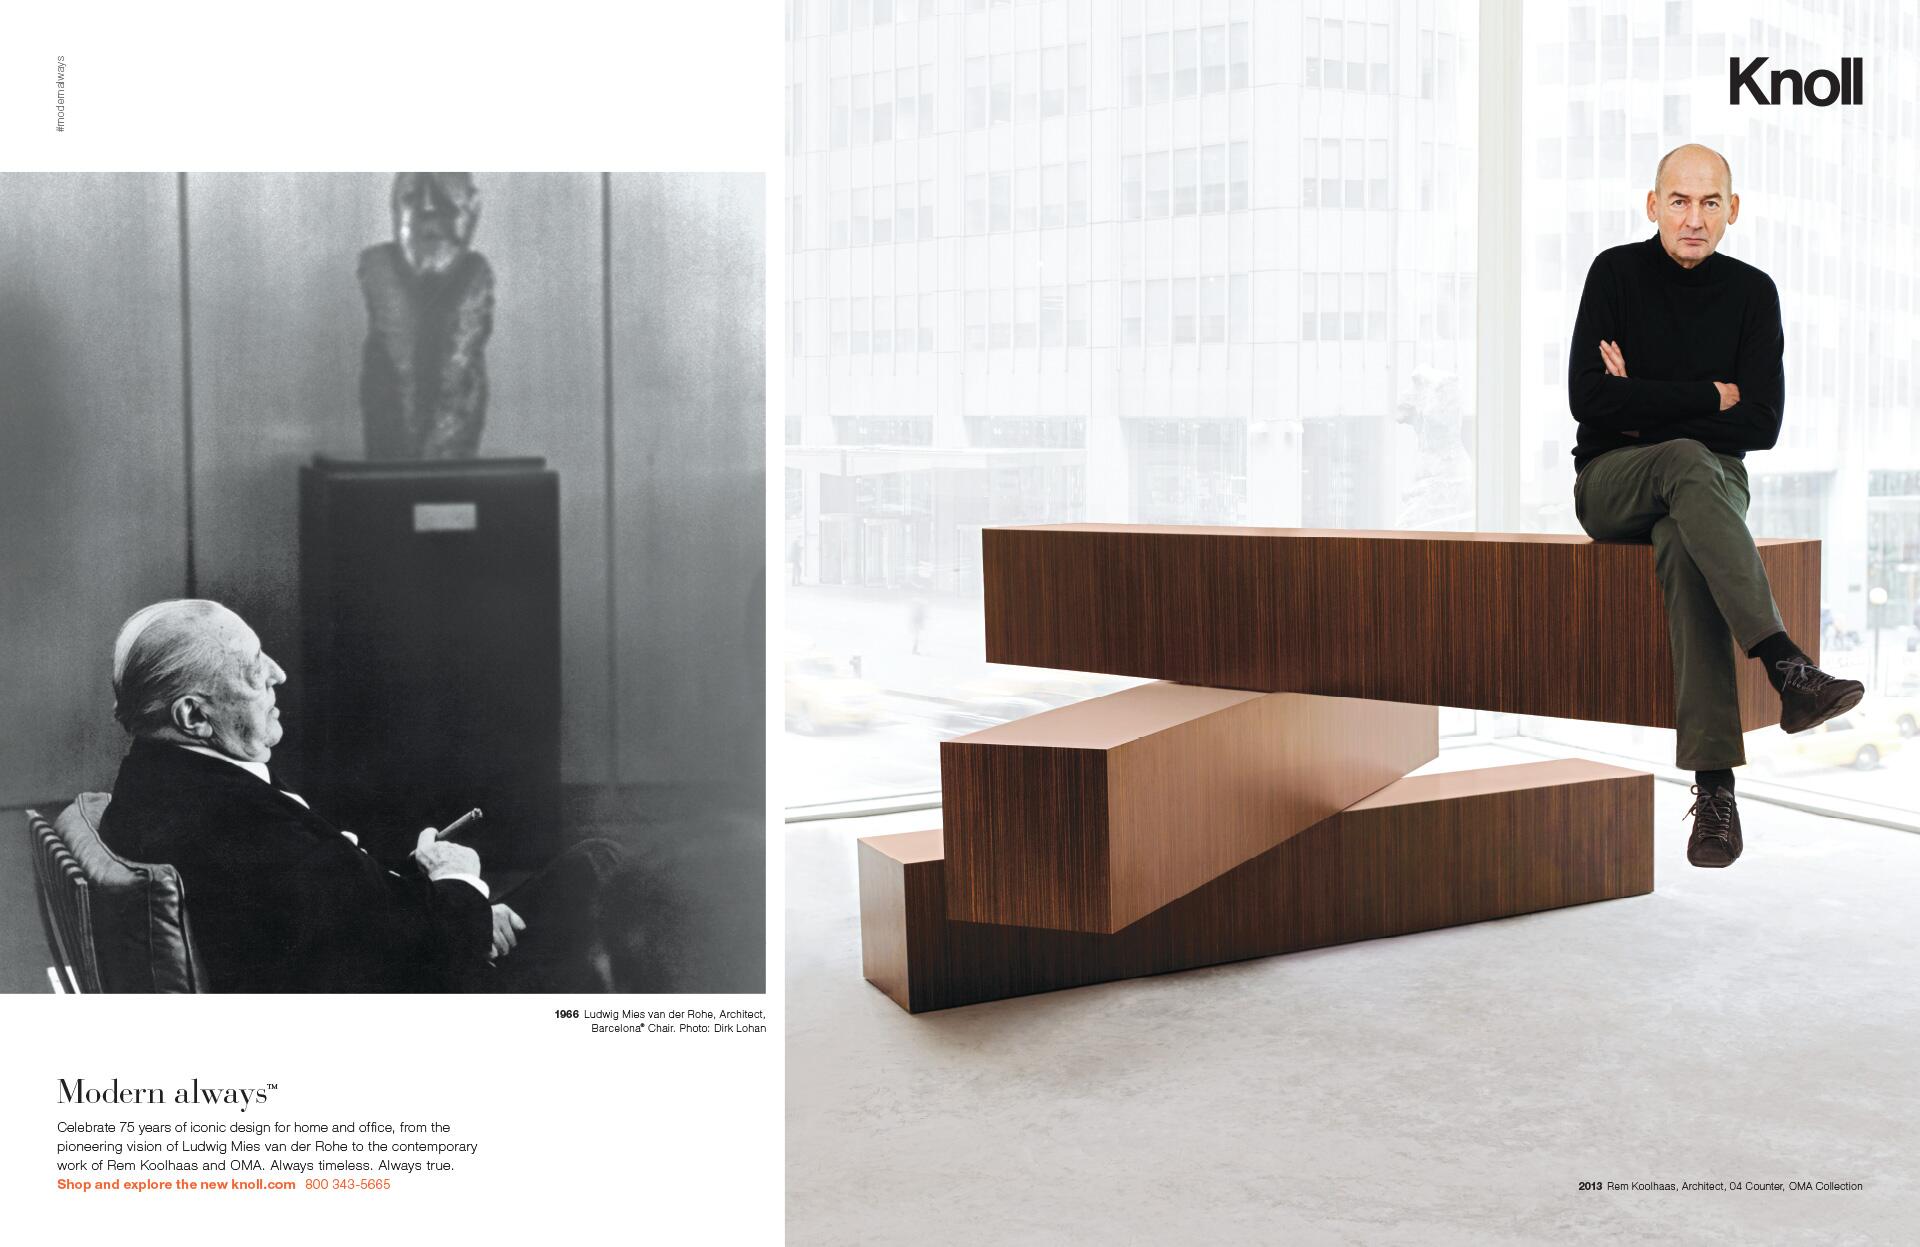 16C-104_Modern always: Knoll 75th Anniversary (with Mies van der Rohe and Rem Koolhaas)_50,000feet